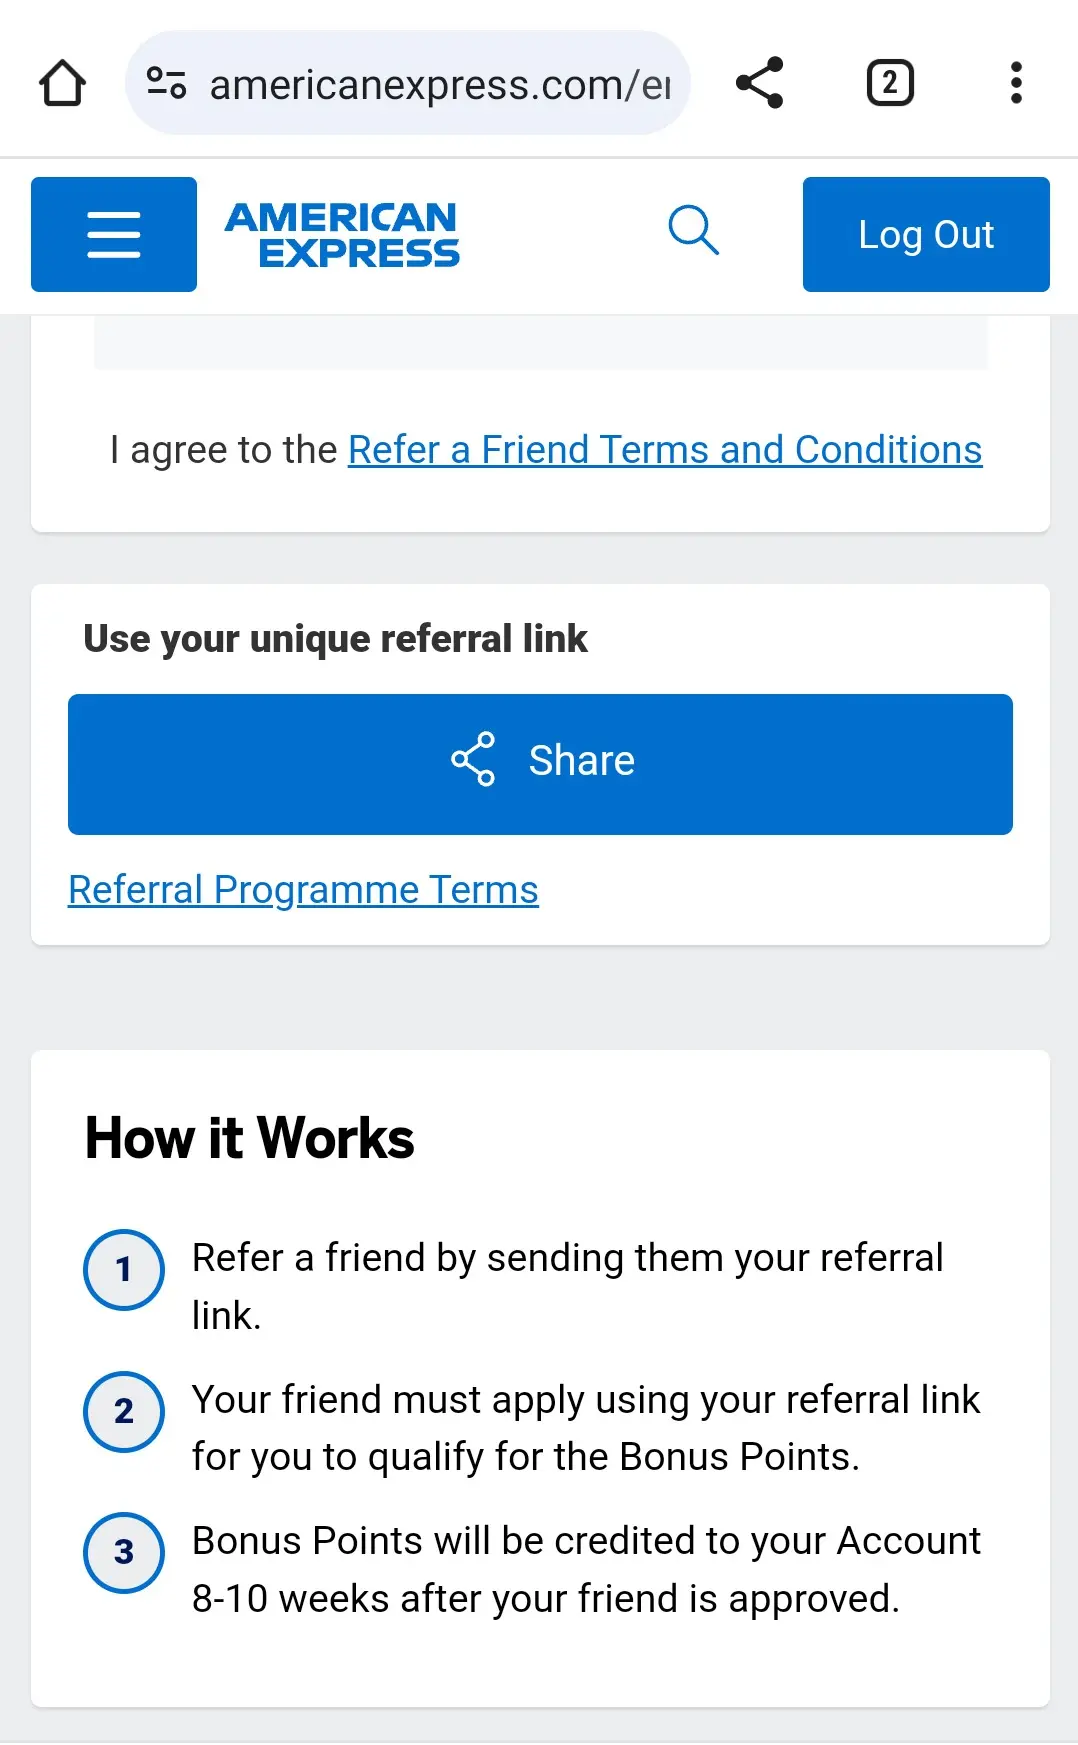 The share link for an American Express referral offer.